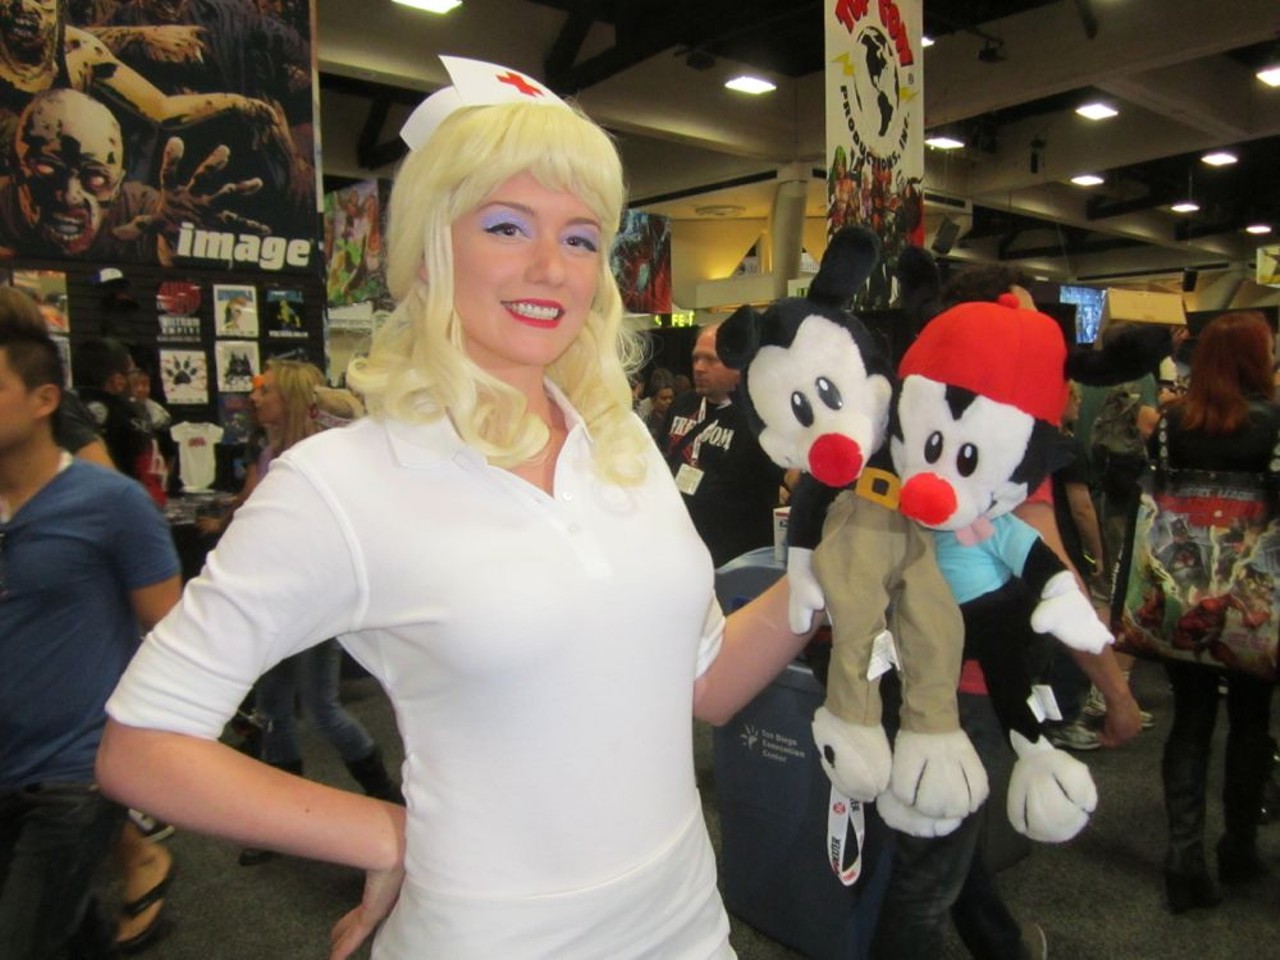 San Diego Comic-Con: Inside the Convention Center